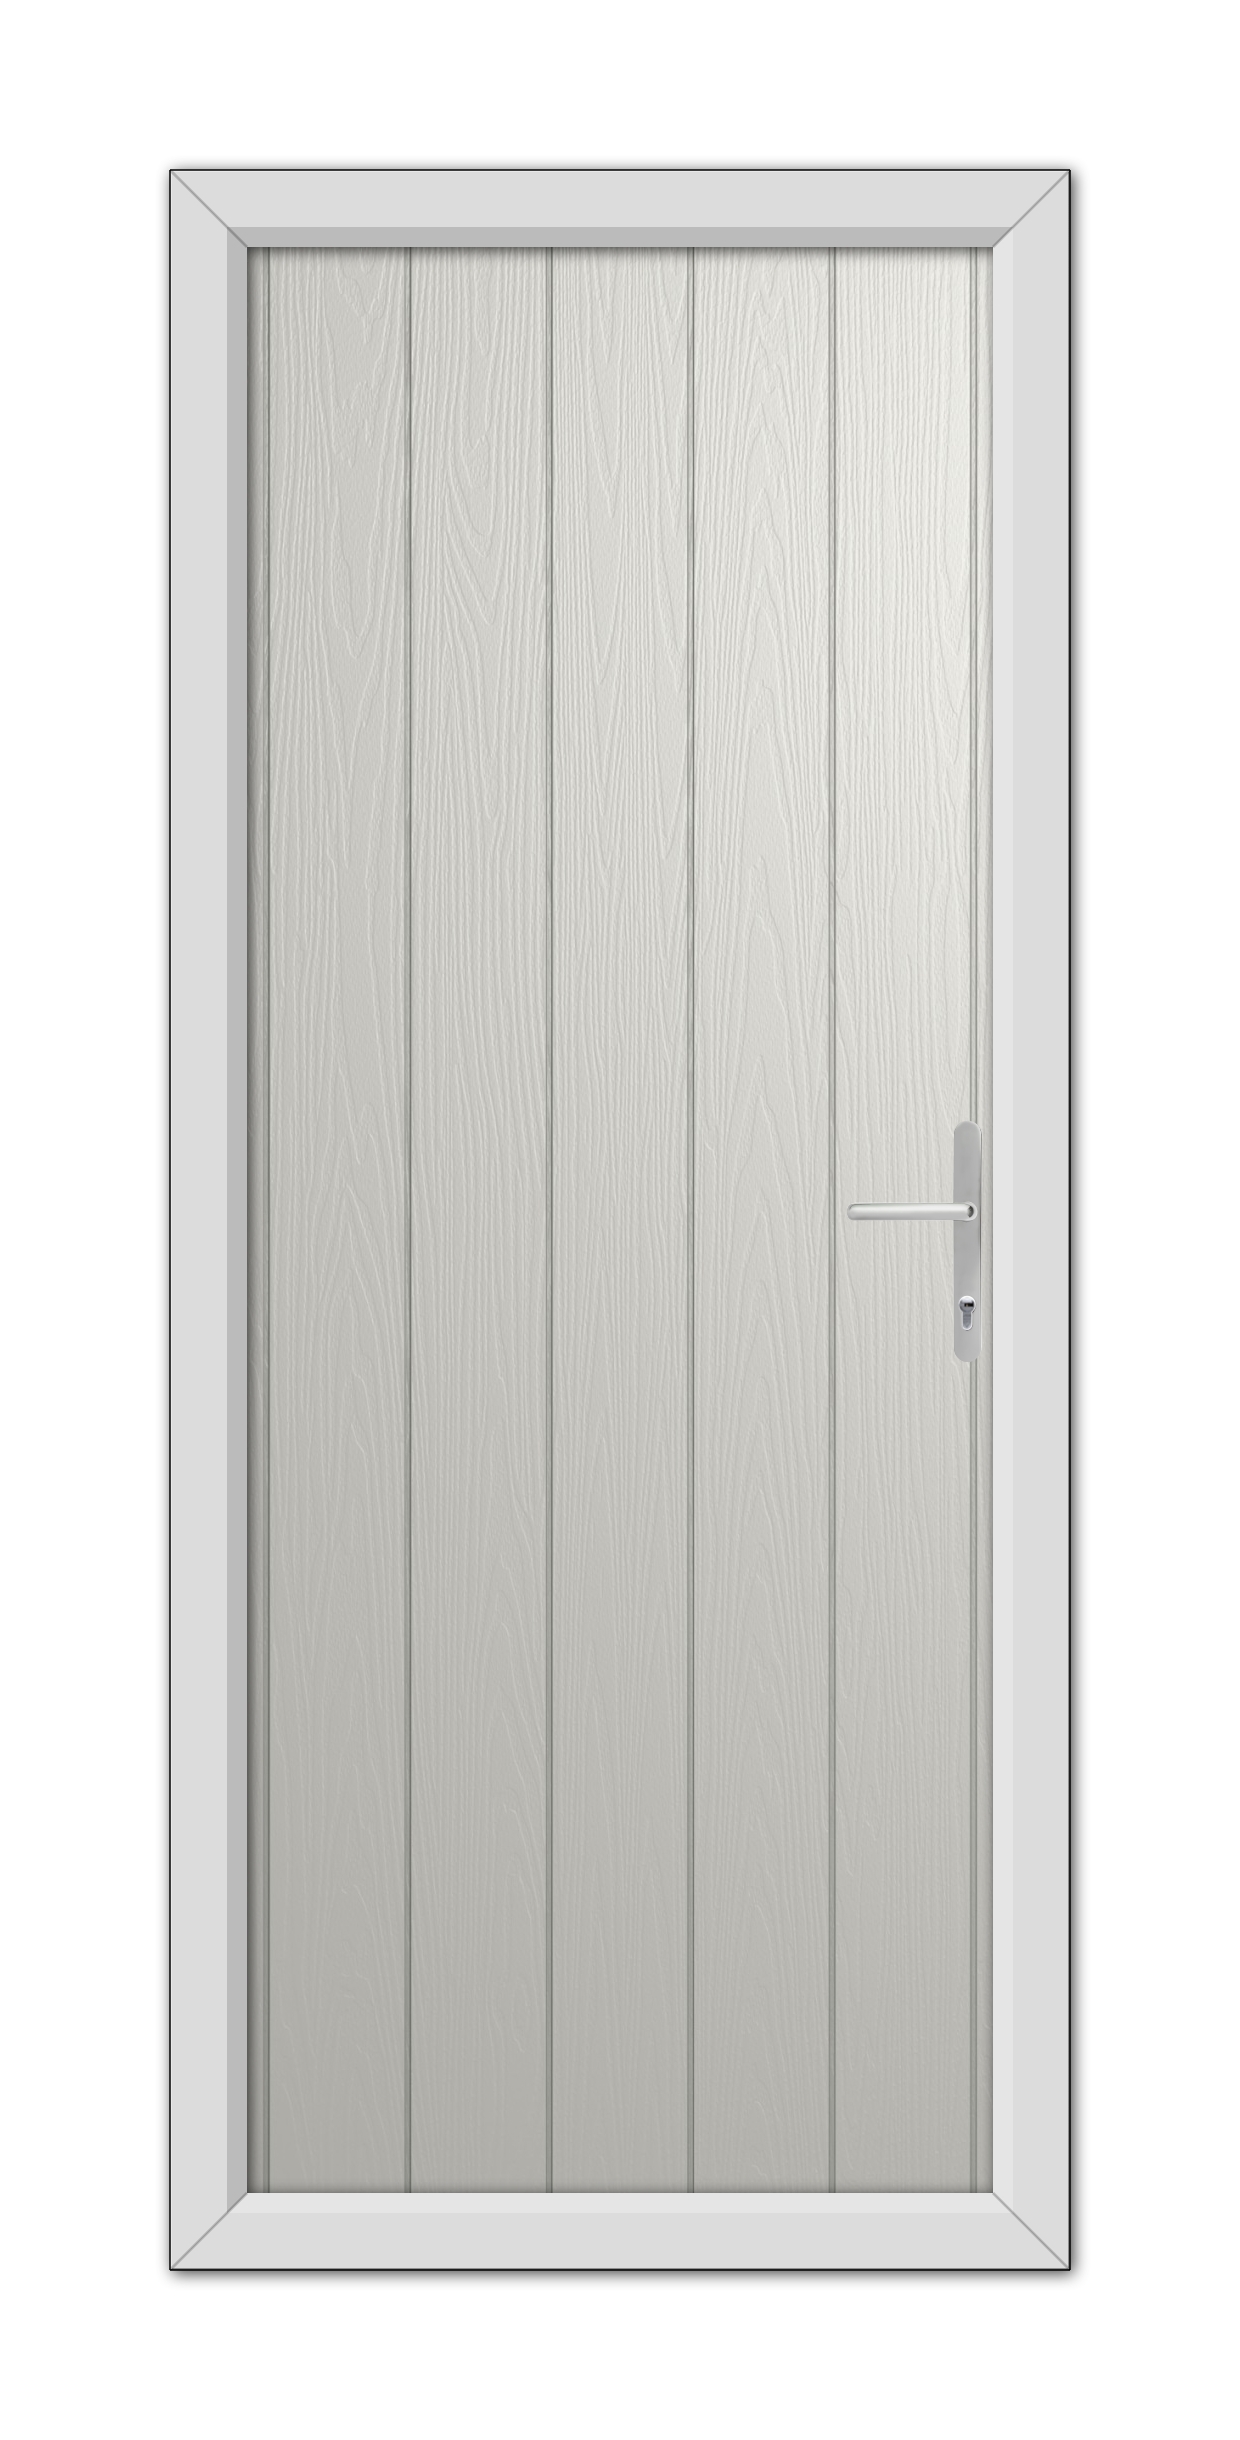 A modern Agate Grey Gloucester Composite Door 48mm Timber Core with vertical paneling, featuring a metallic handle, set within a simple frame.